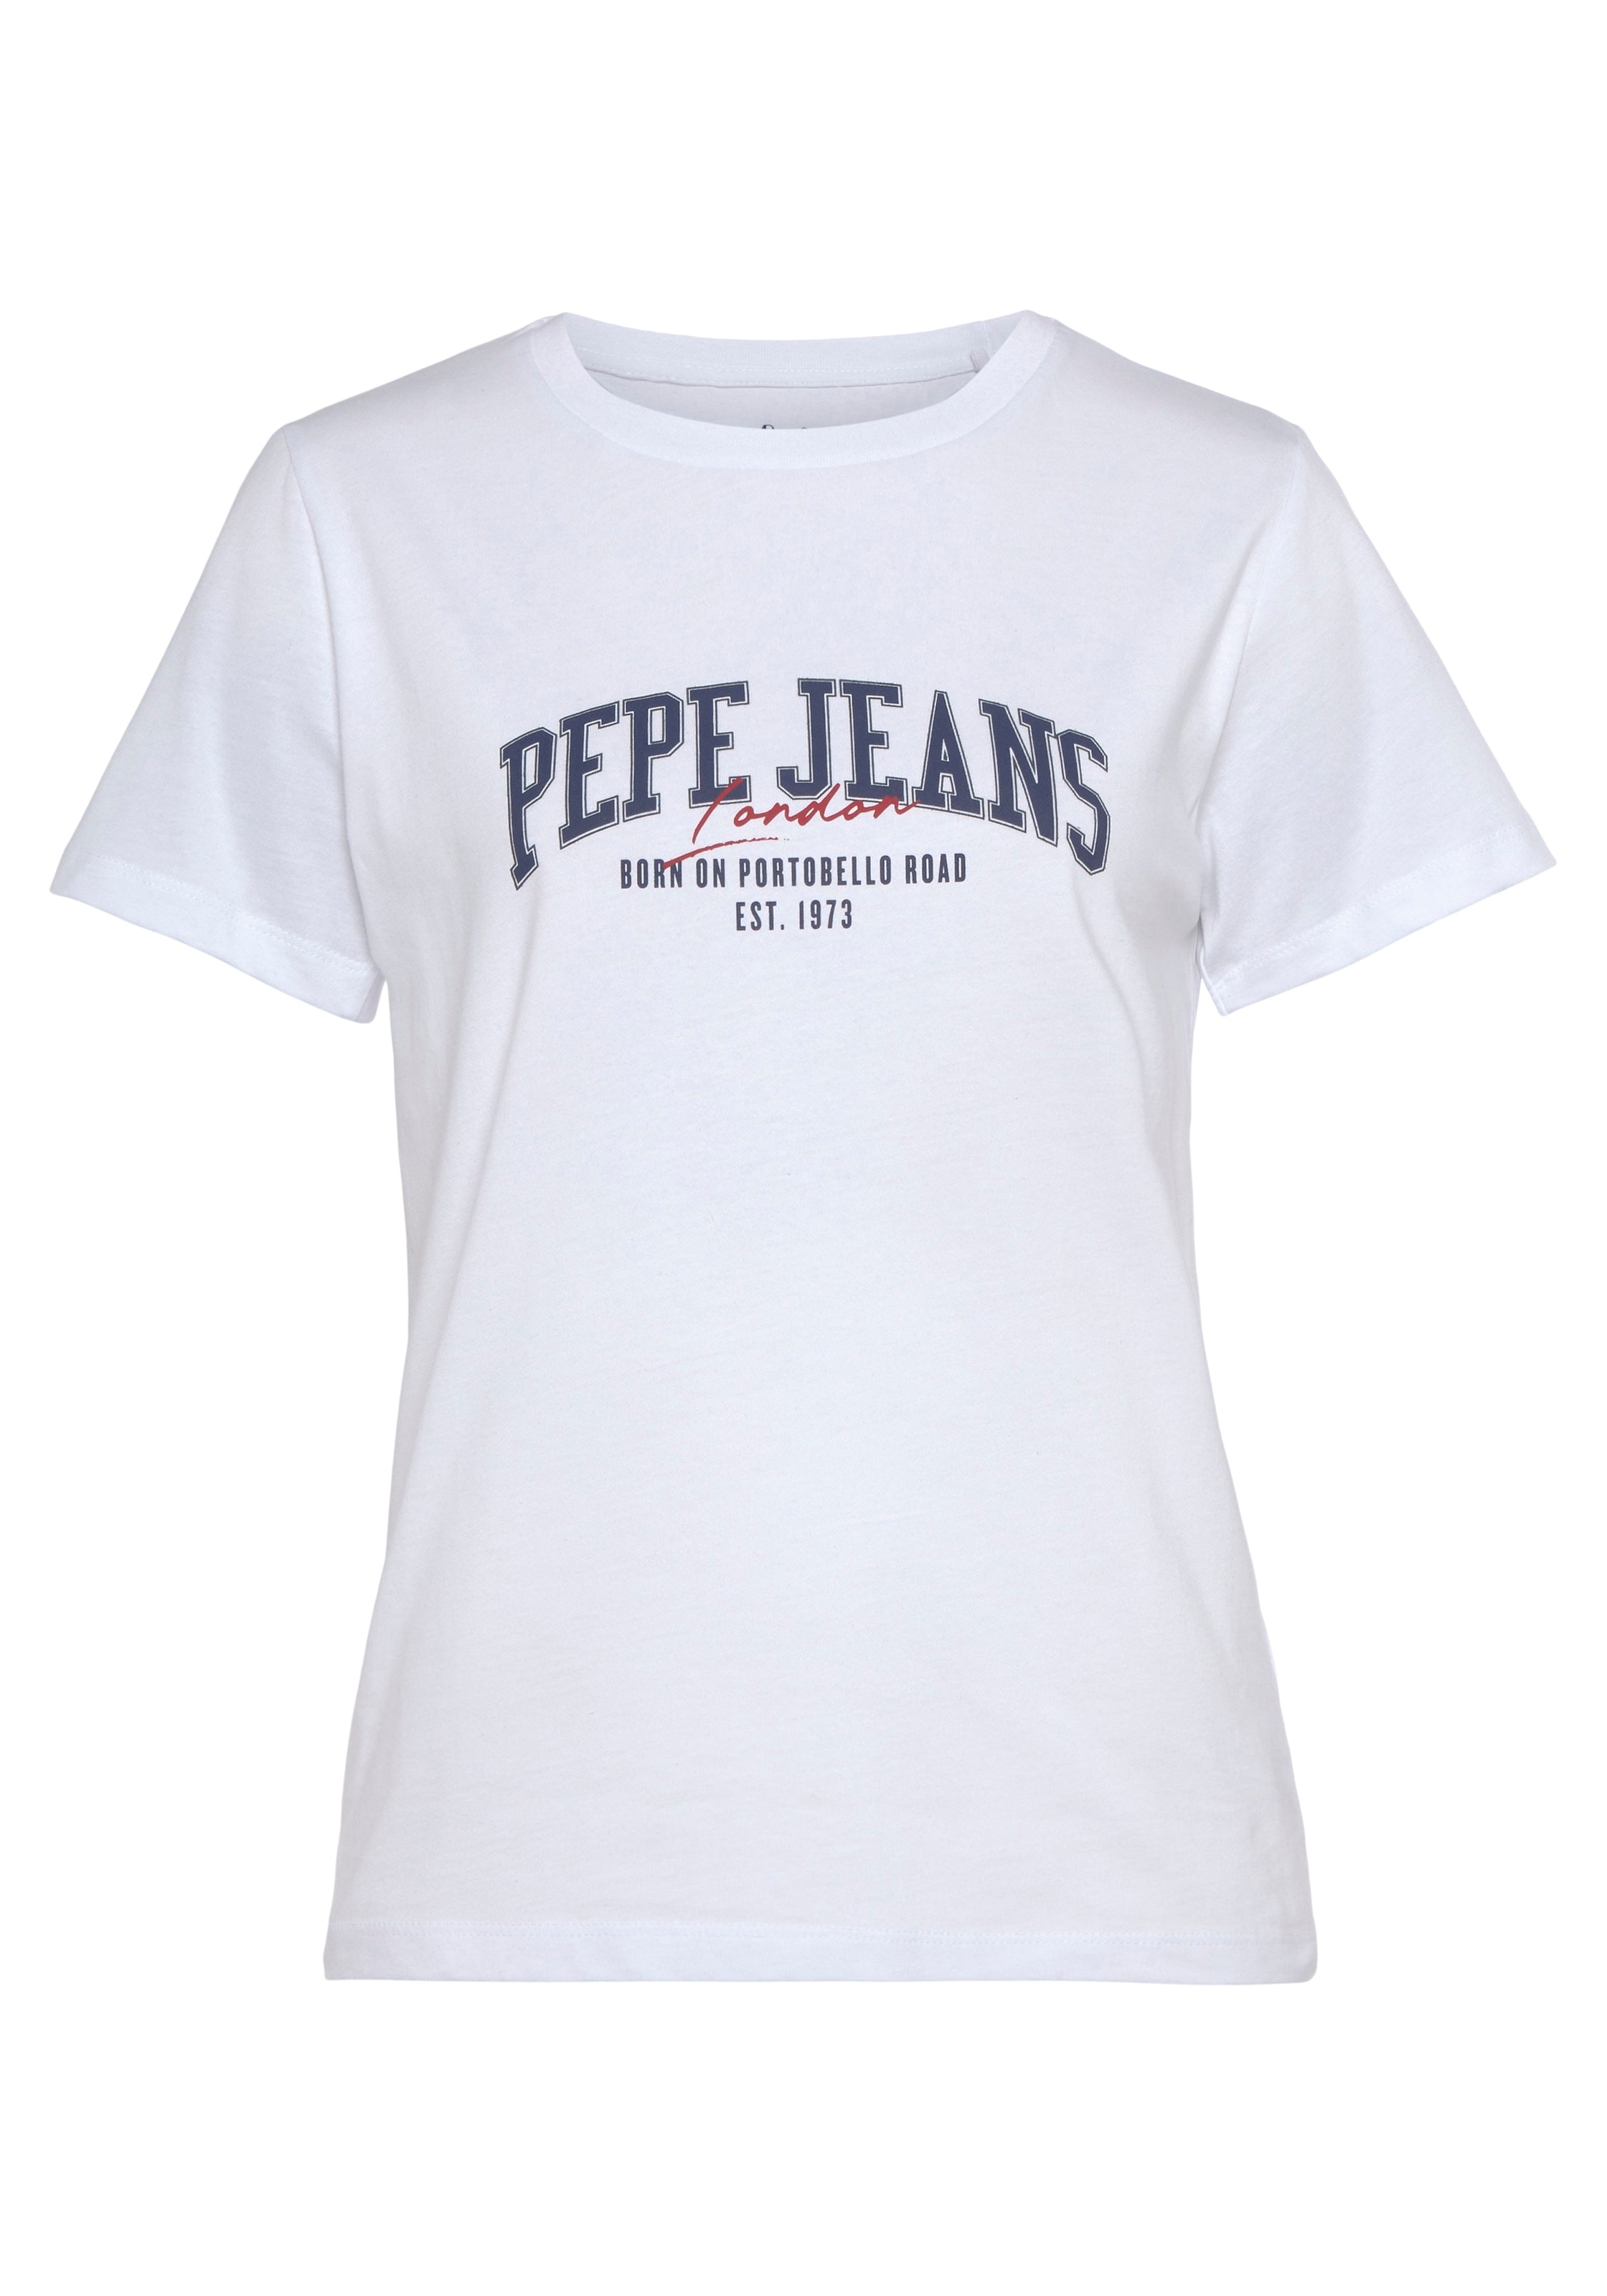 Pepe Jeans bei »KATE« T-Shirt online